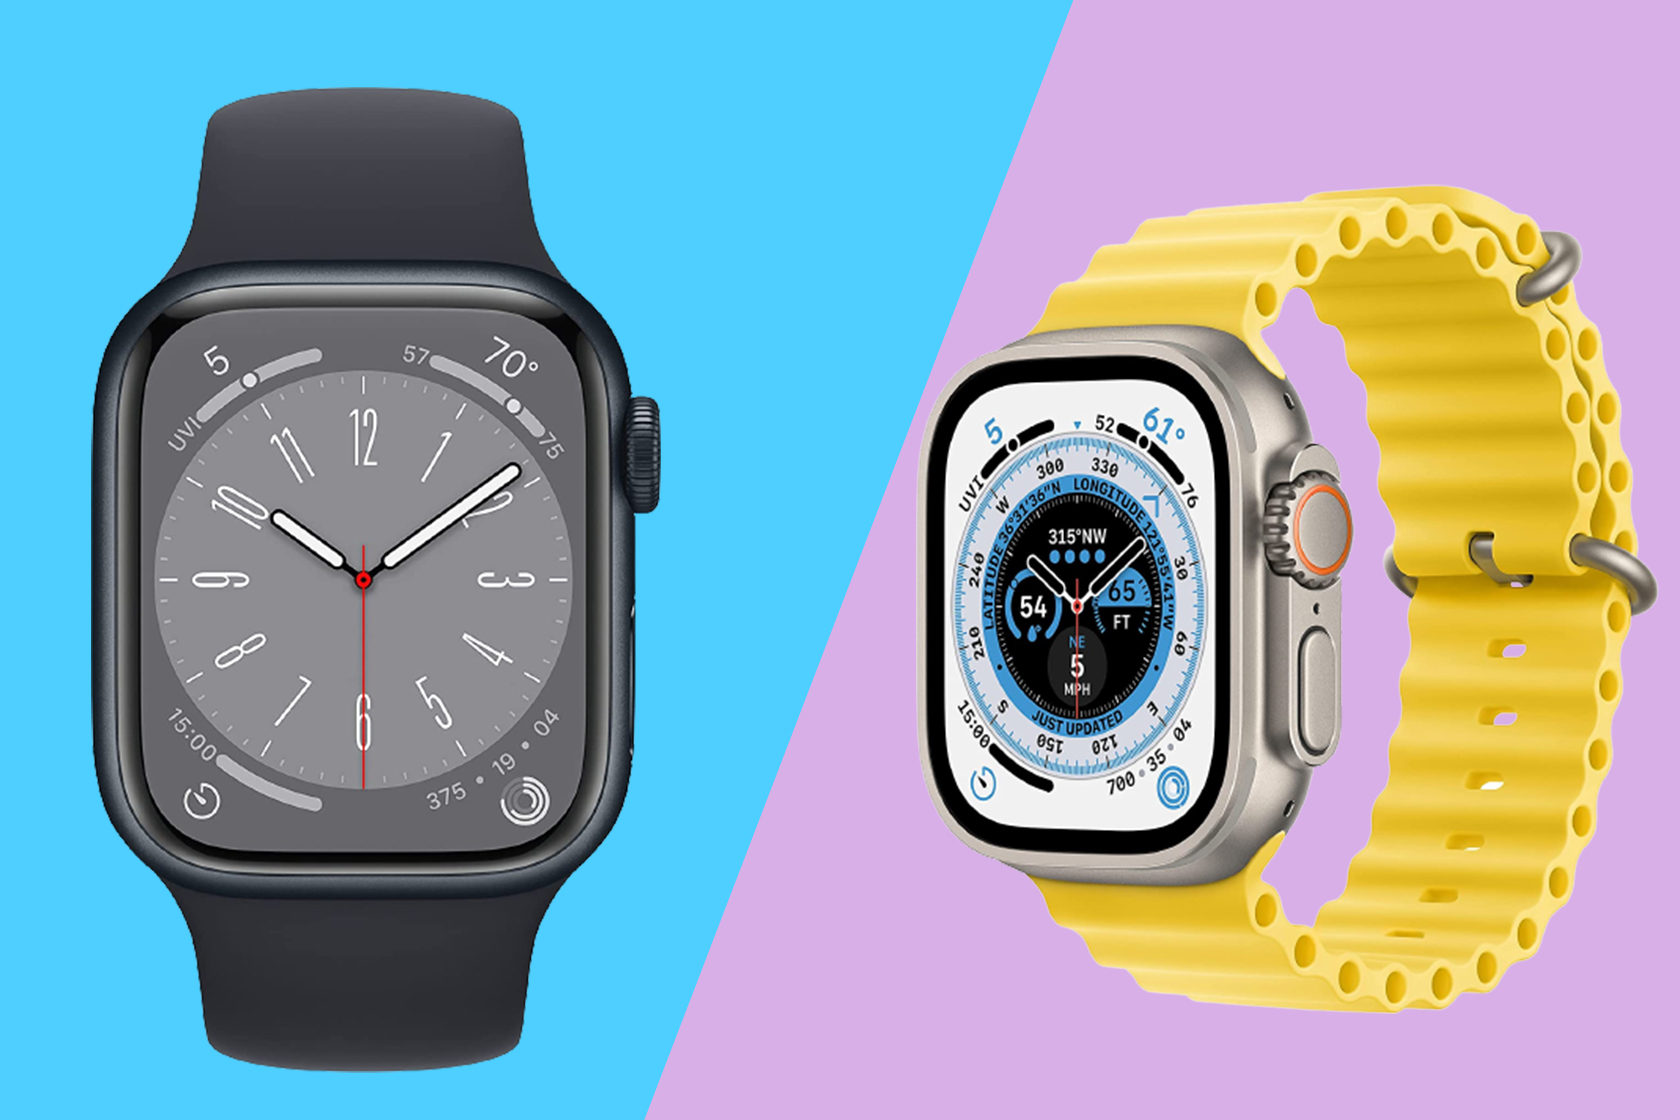 Apple Watch deal: Save up to $97 on a smartwatch today